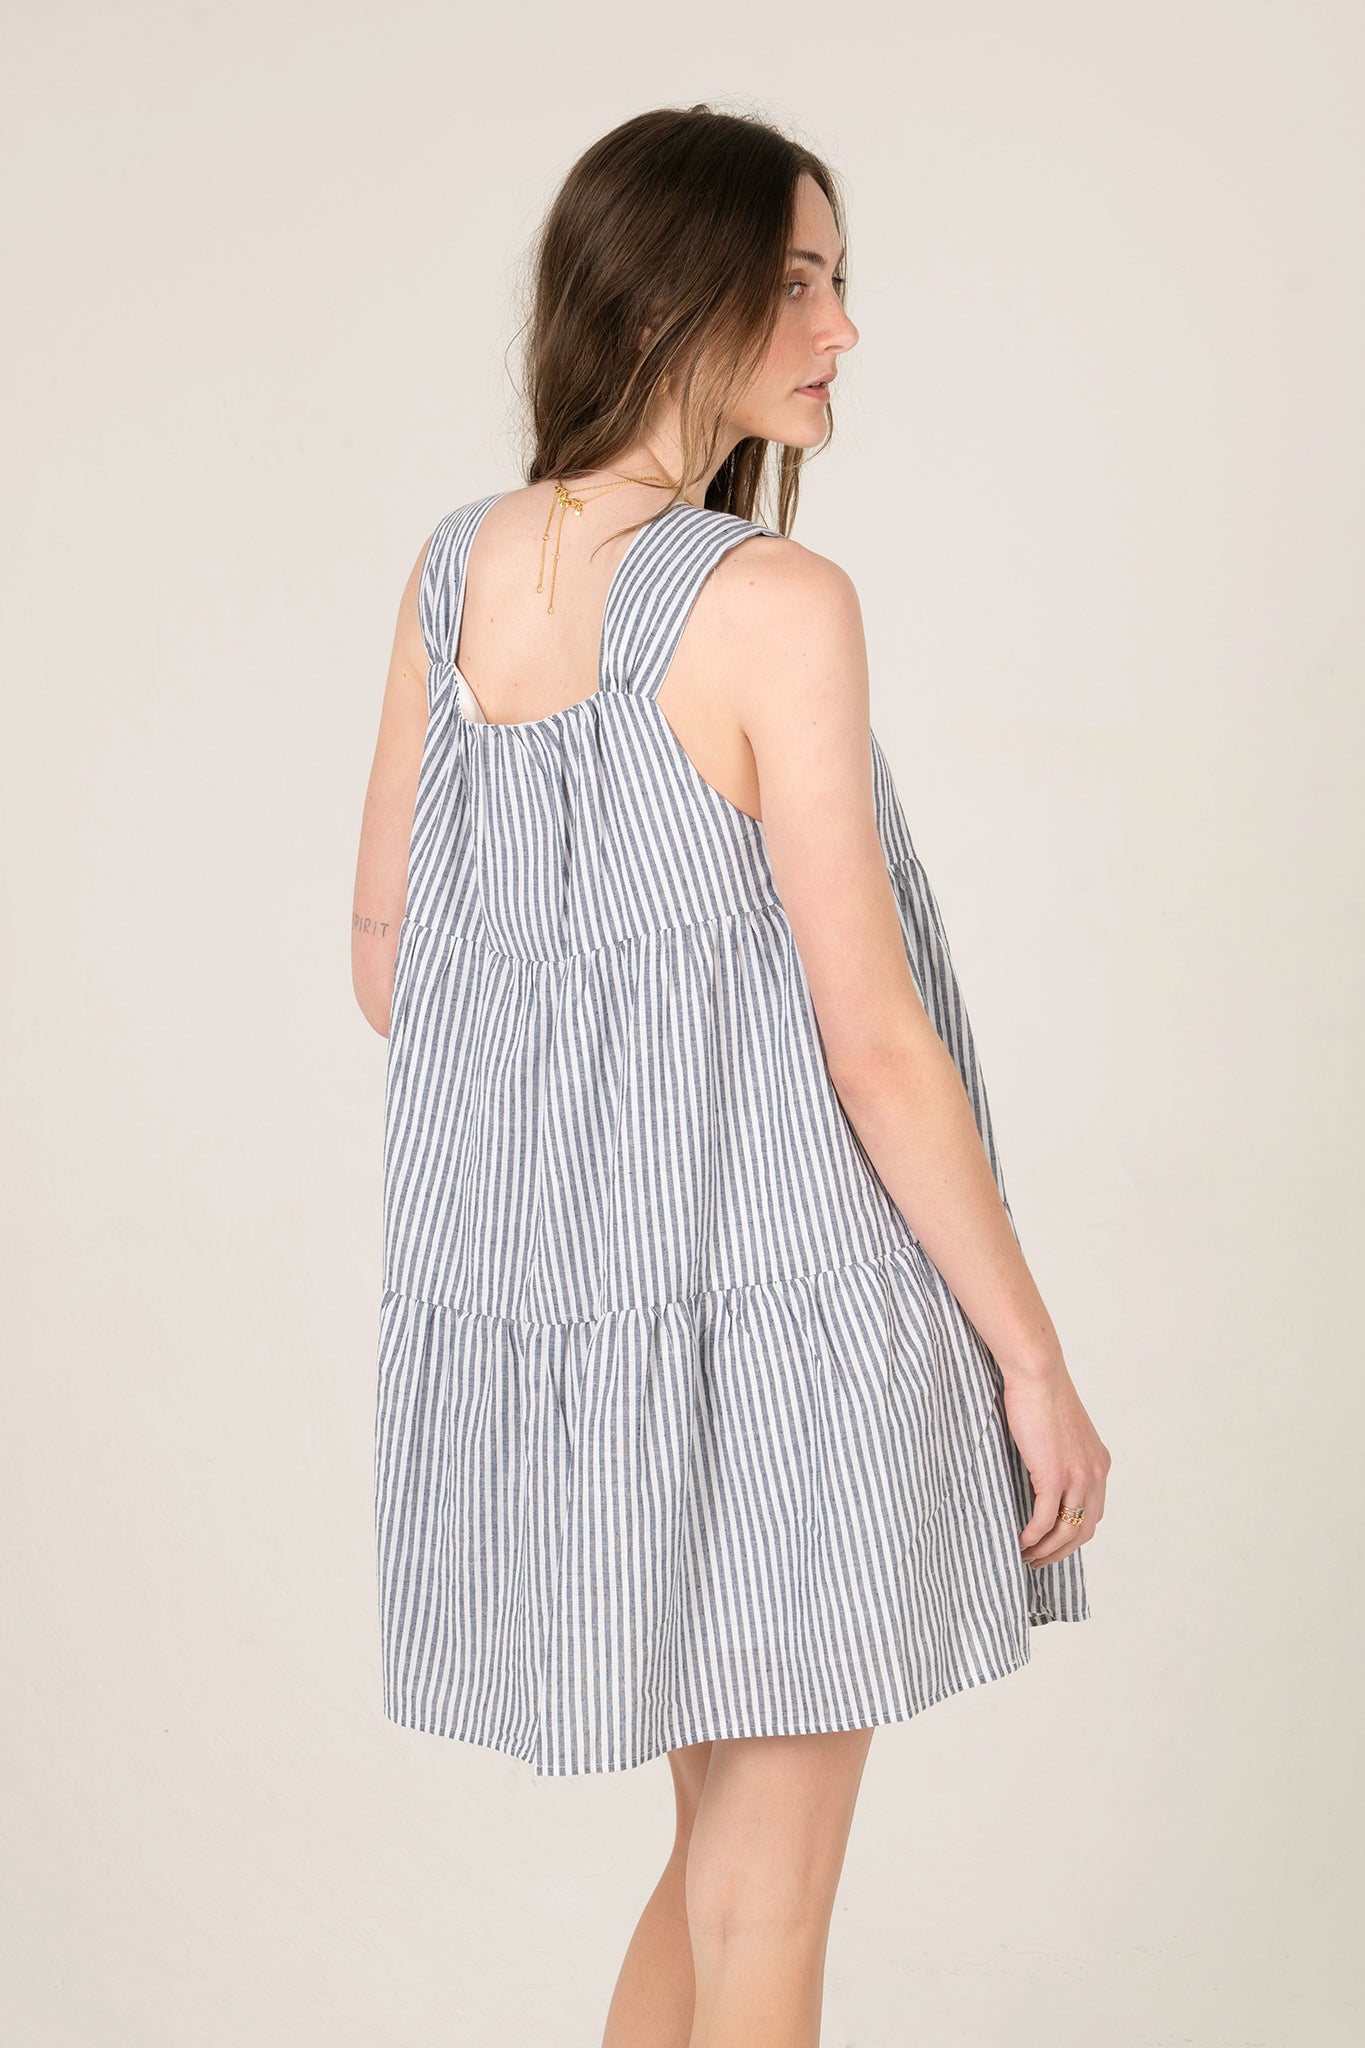 View 3 of Daphne Baby Doll Striped Dress, a Dresses from Larrea Cove. Detail: .